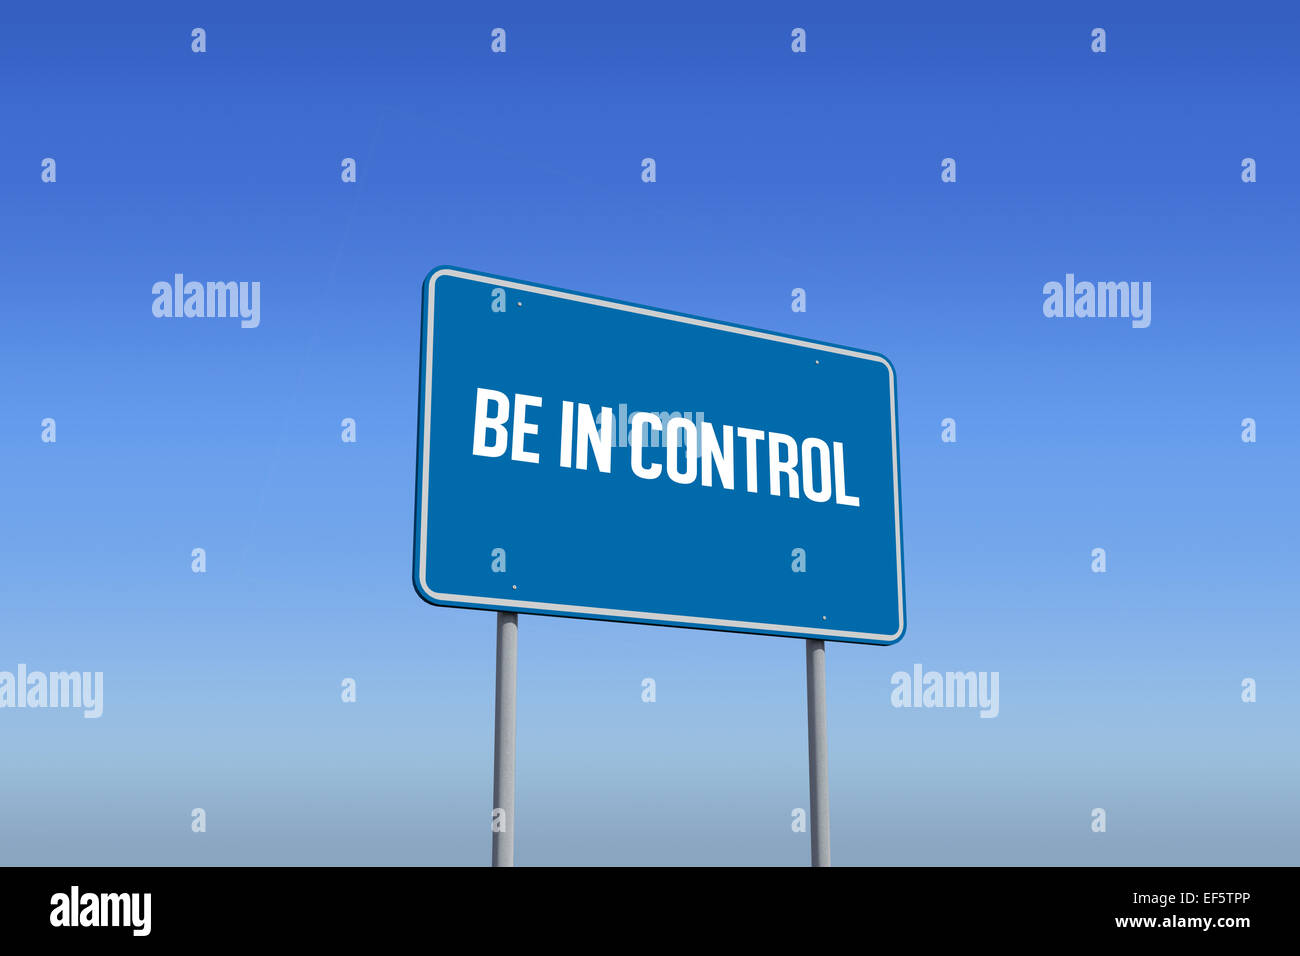 Be in control against bright blue sky Stock Photo